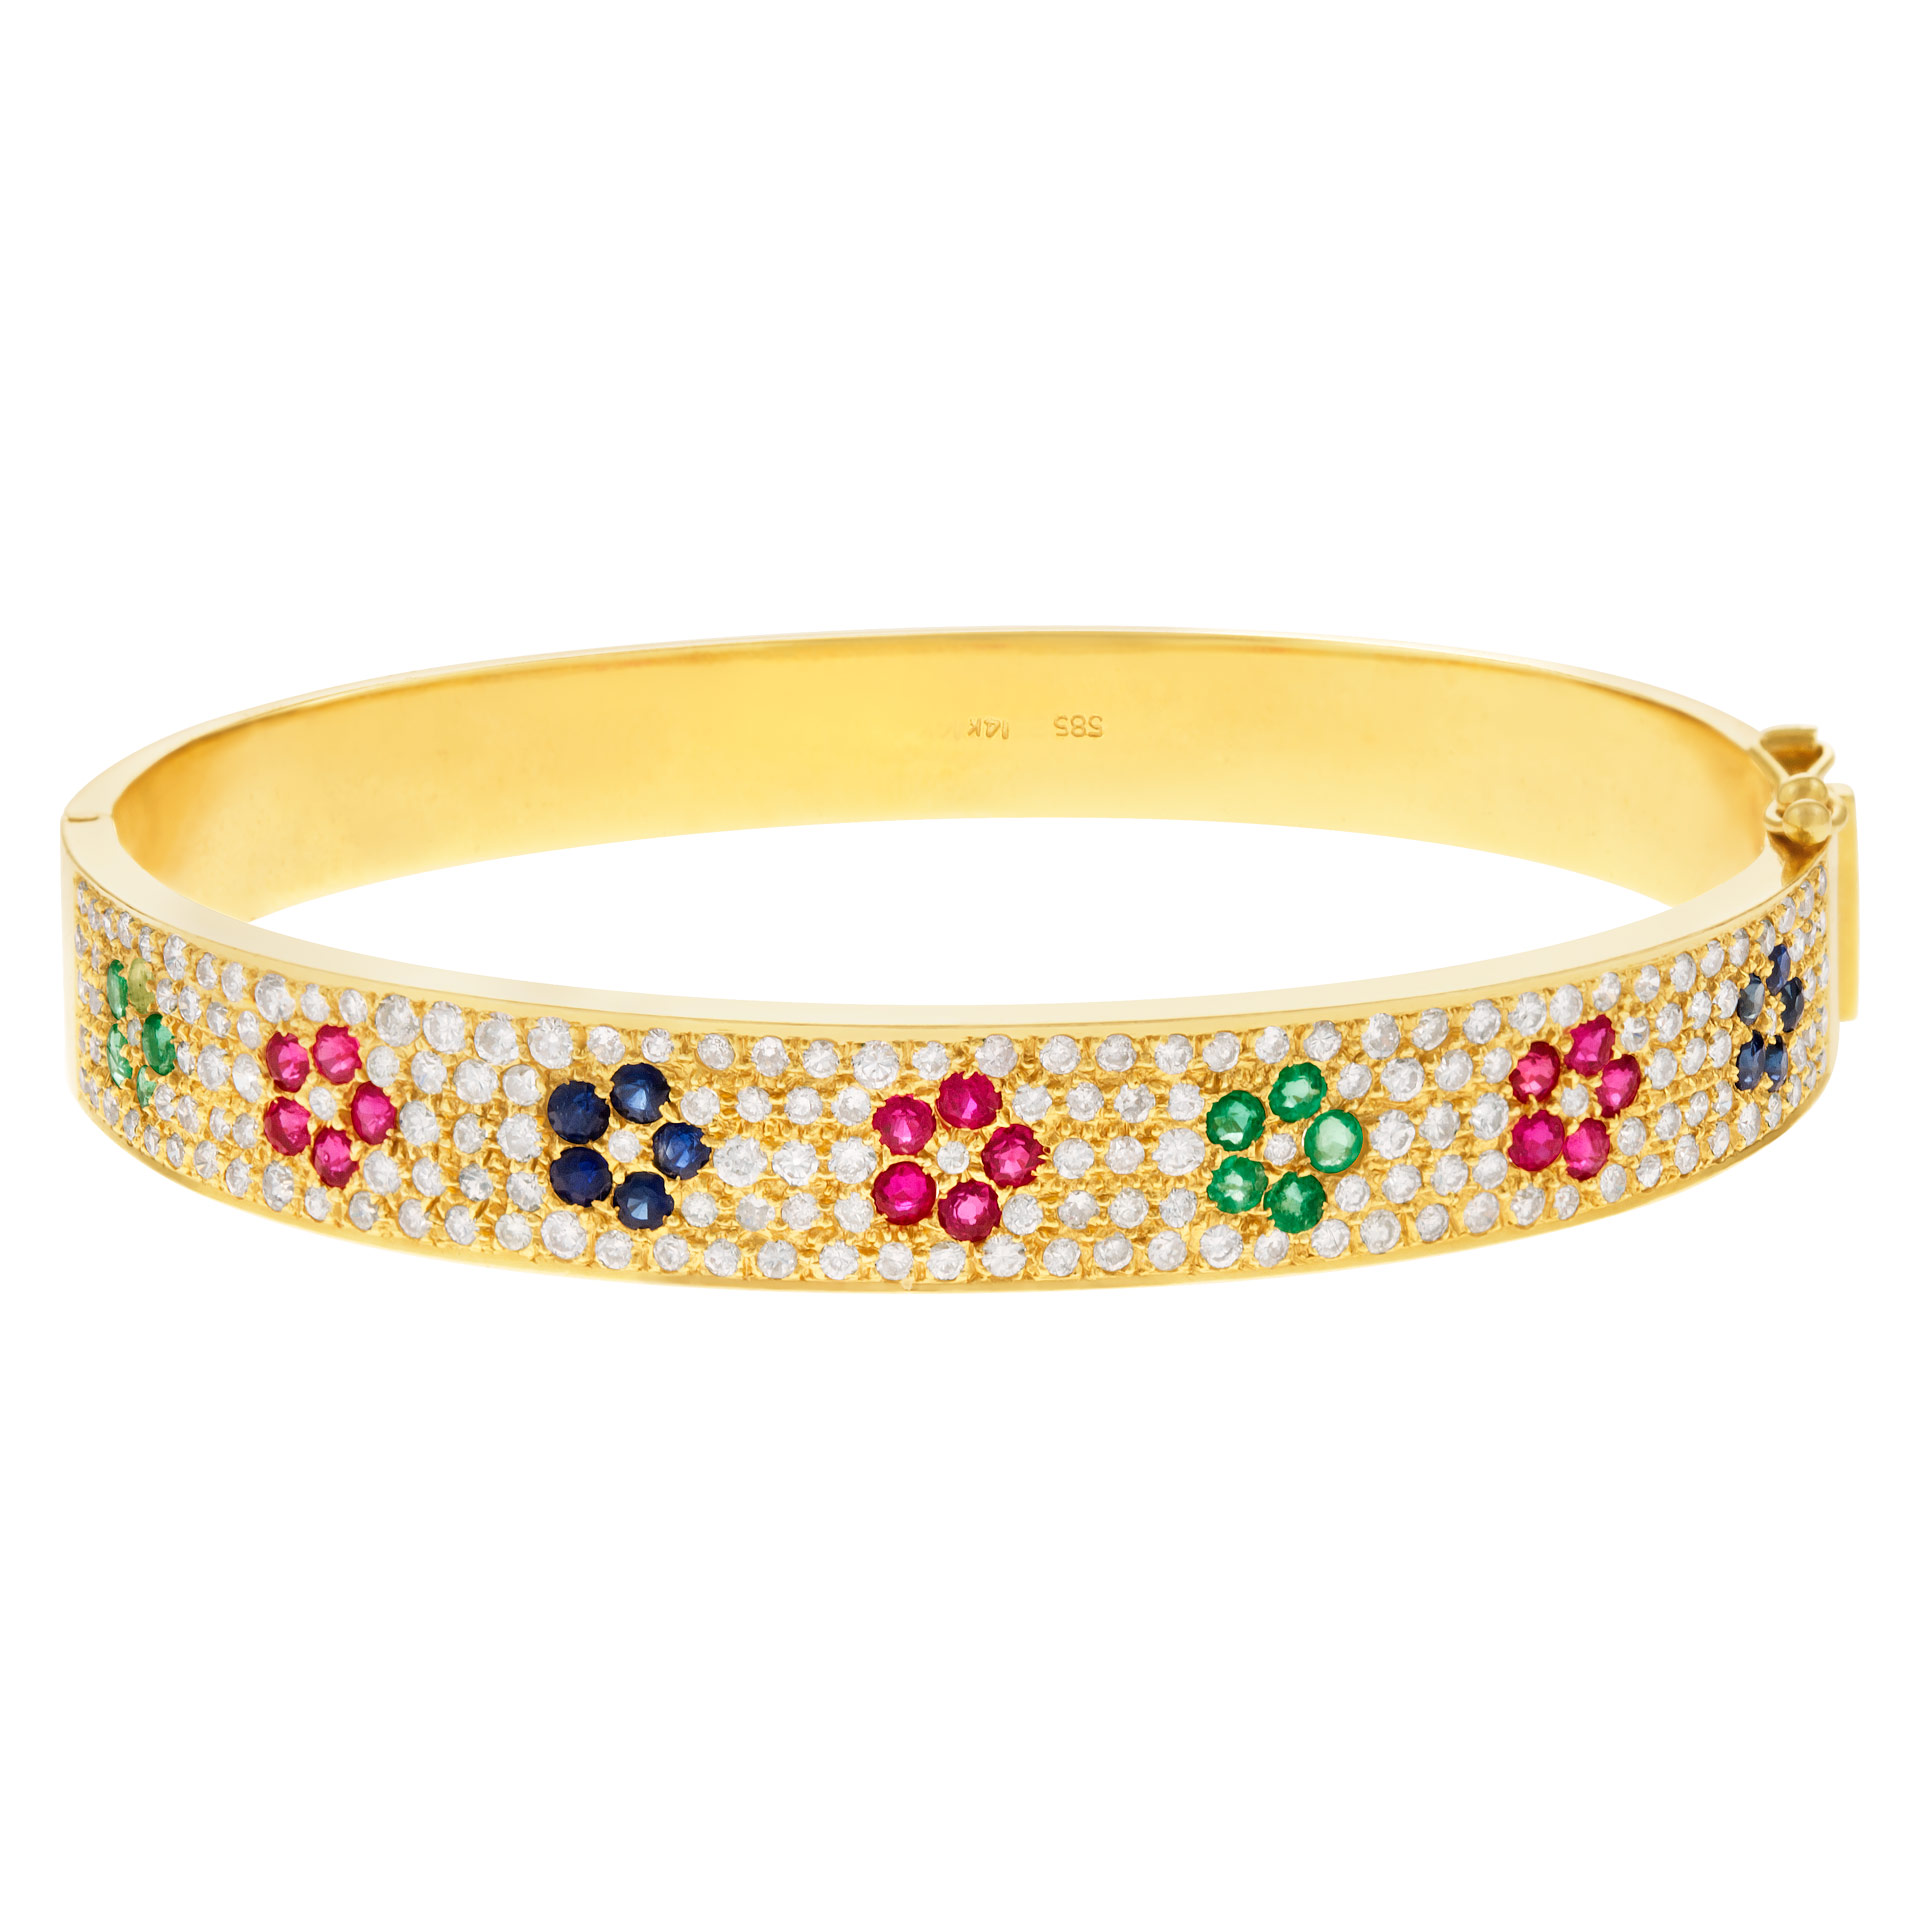 Flower bangle in 14k yellow gold. 4.00 carats in pave diamonds